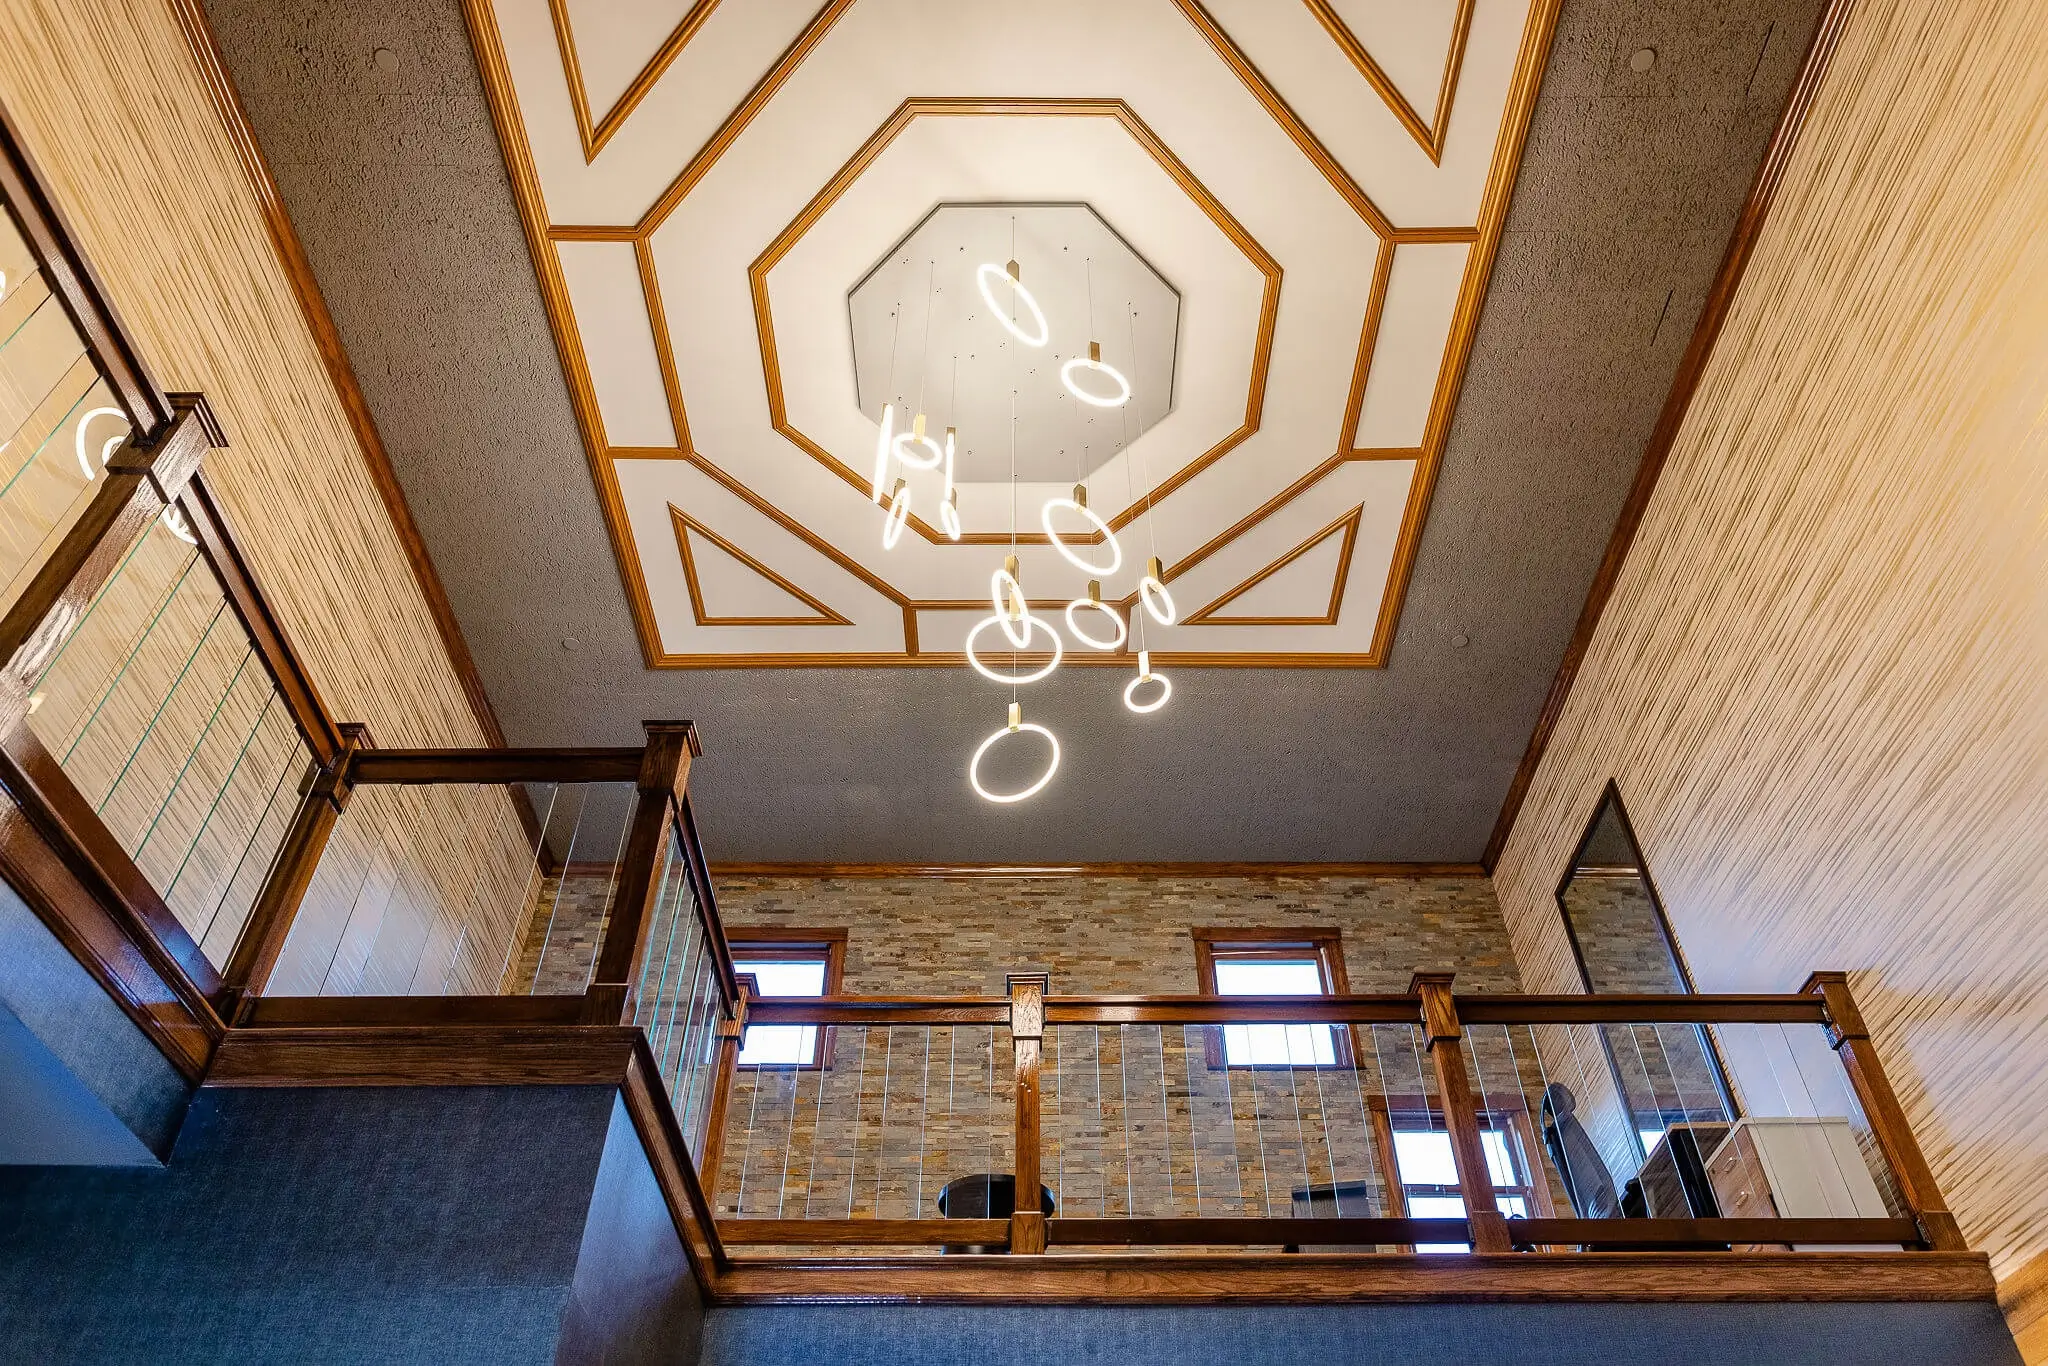 Chateau Merrimack lobby ceiling with modern light installation and balcony